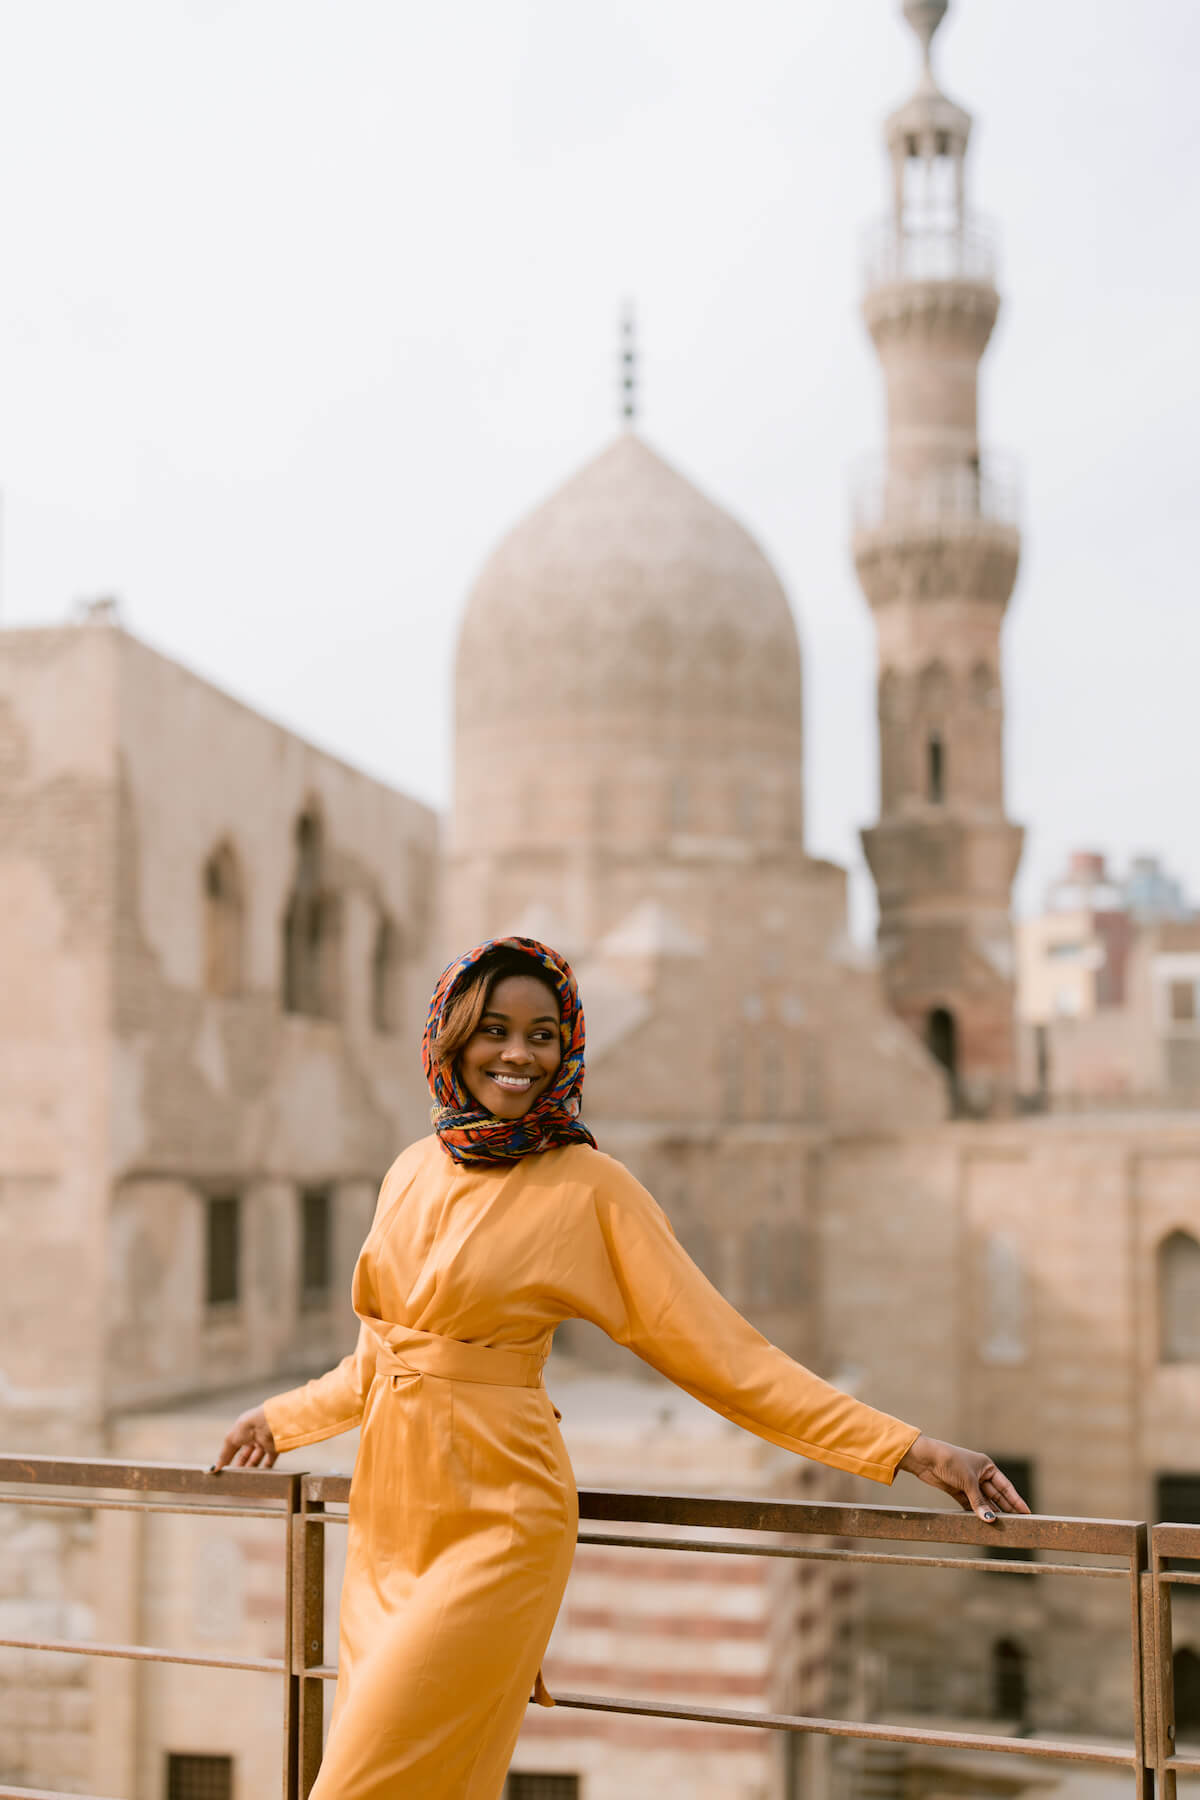 Headshot of a smiling woman on a bridge in front of a mosque